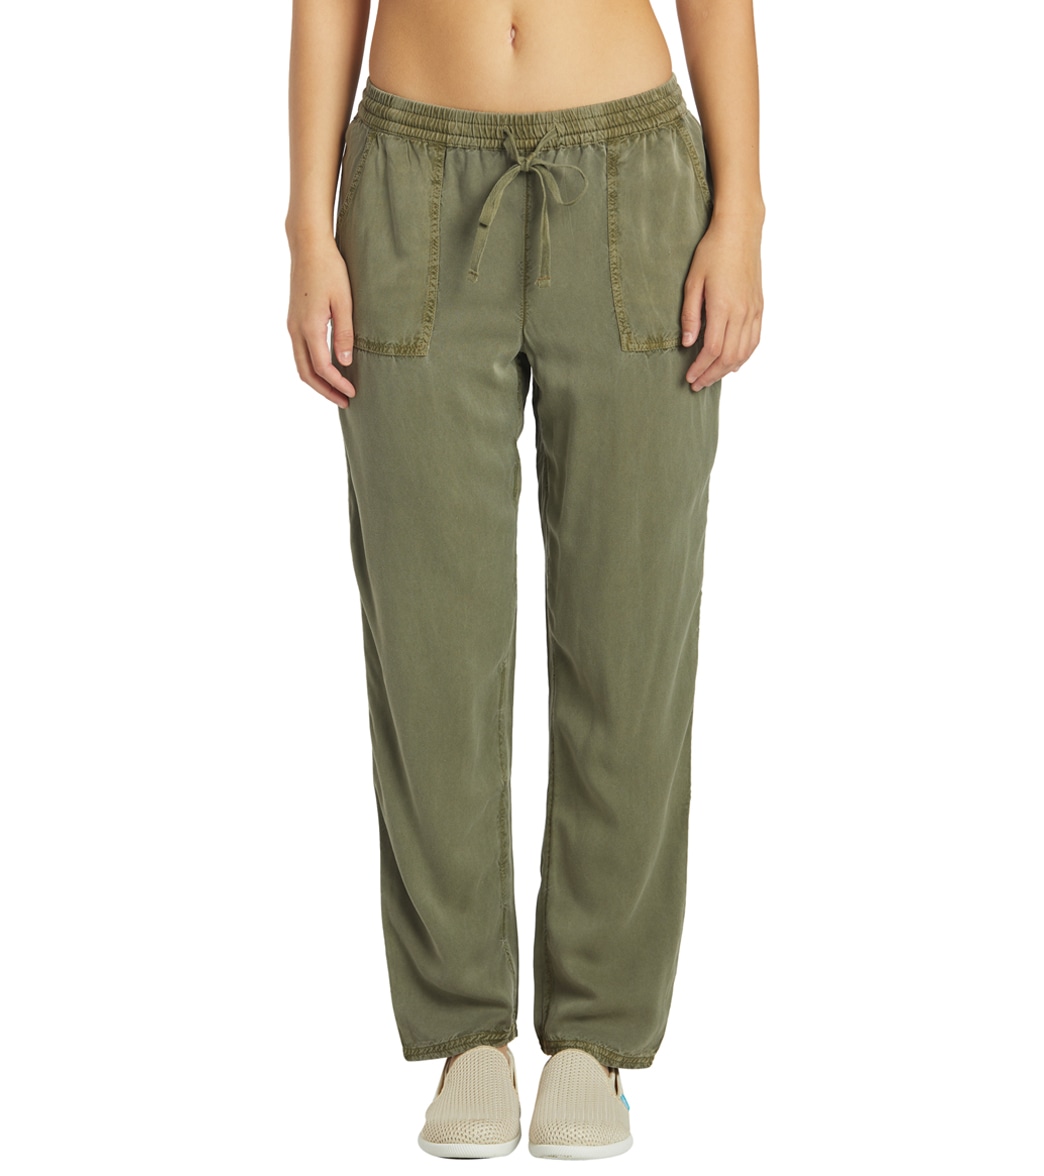 O'neill Women's Fran Woven Pants - Army Large - Swimoutlet.com